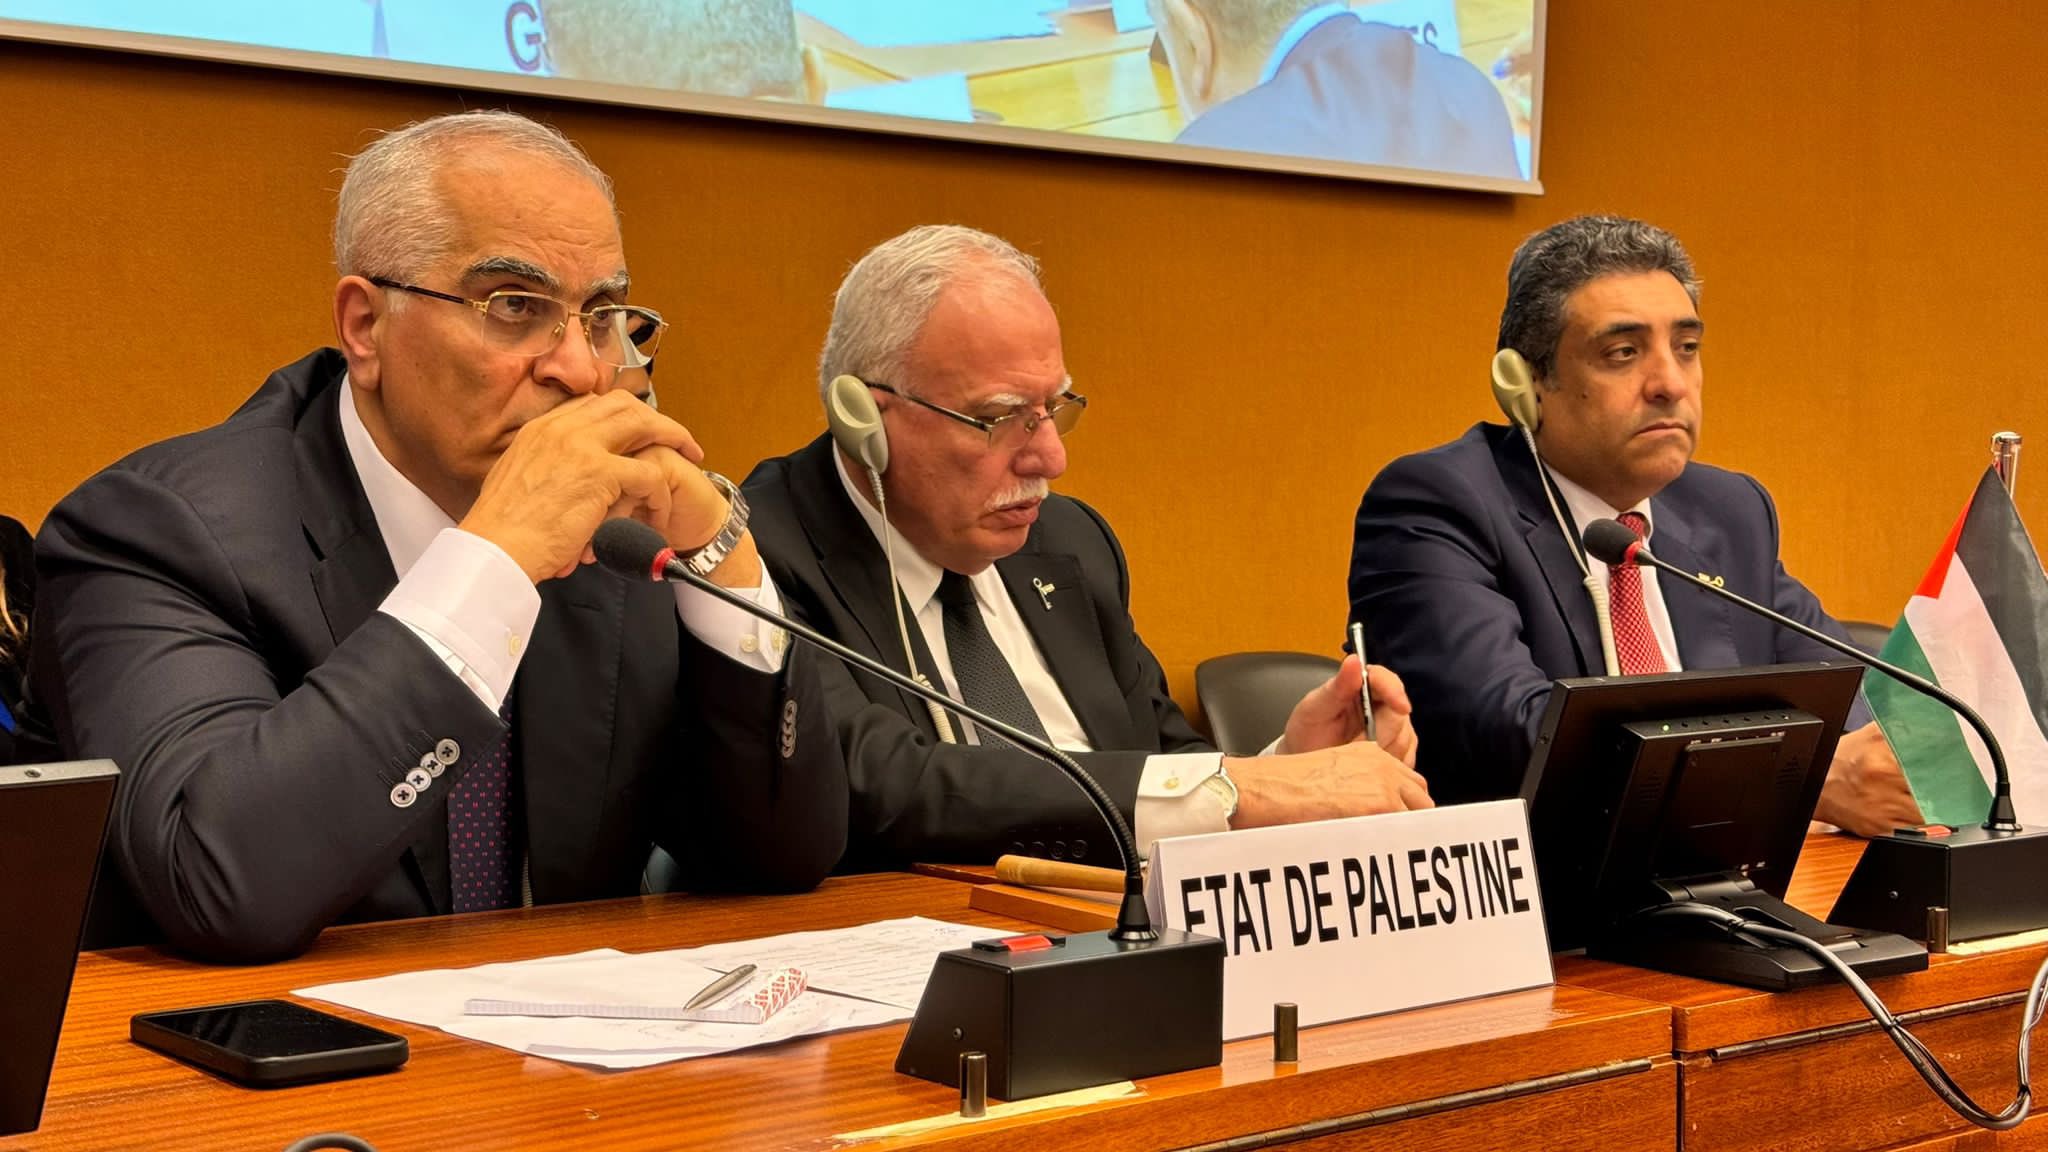 HRC55 Ministerial High-level Event on Human Rights in Palestine